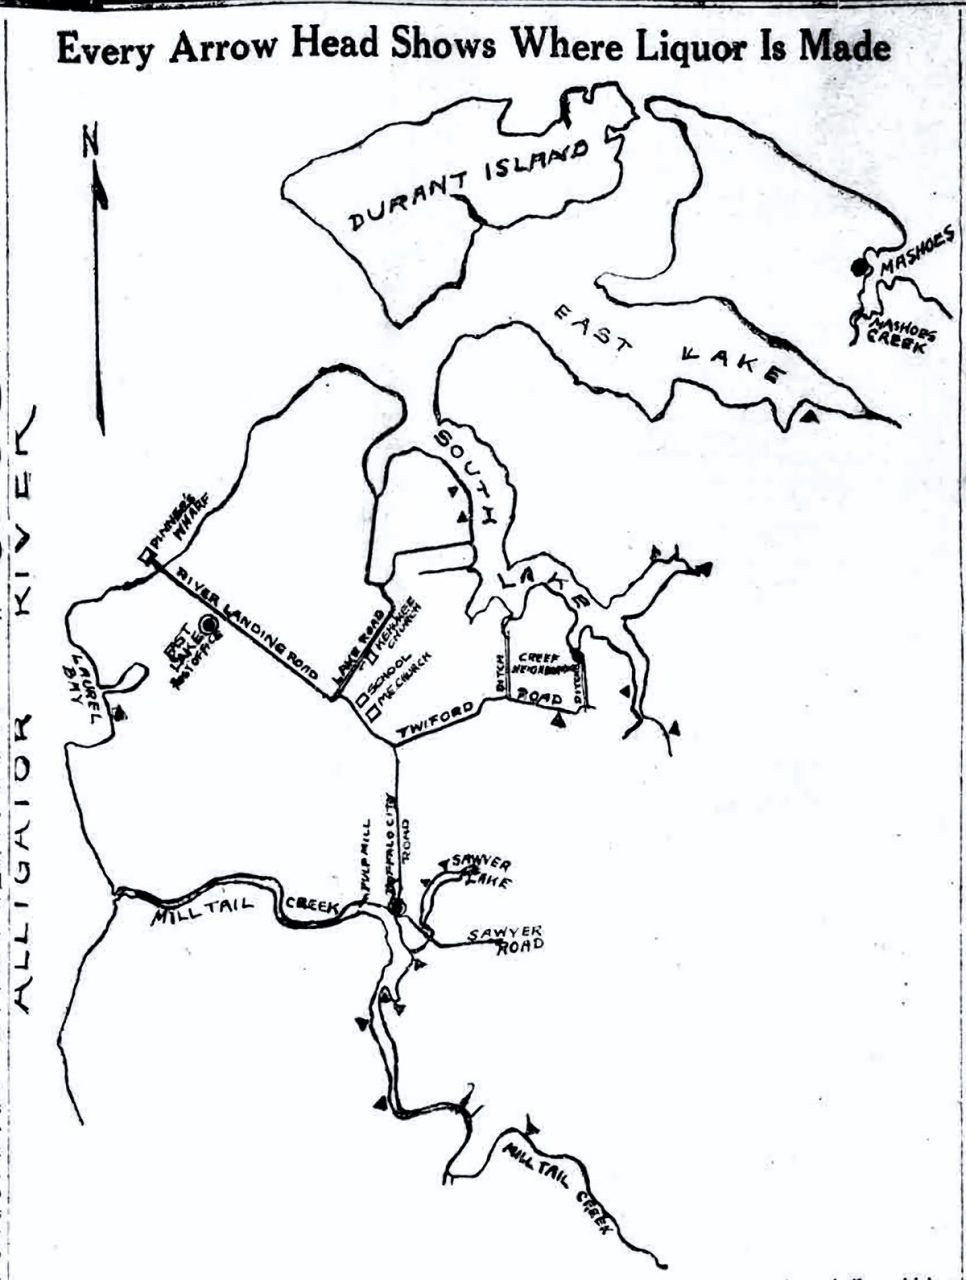 This map appeared in the May 5, 1926, Independent, with the following caption: "Every arrow head on the above map indicates location of a 10 to 20 horse power steam boiler whiskey distillery. It is the map used by the Federal dry agents in their raid on East Lake distillers two weeks ago. While only forty miles south of Elizabeth City, East Lake is one of the most inaccessible. and bewildering morasses in Eastern North Carolina. The Great Dismal Swamp is a highly improved region in comparison with East Lake, The section is surrounded by impassable swamps and the only way in and out of the region is by the water outlets of East Lake and Mill Tail Creek into Alligator River. It is proposed now to station fast U.S. Coast Guard patrol boats off the south of Mill Tail Creek and the Mouth of East Lake and bottle the distilleries up. The map indicates how easily this can be done—provided of course the distillers don’t buy off the Coast Guard patrol, just as the have bought protection from other enforcement officers."